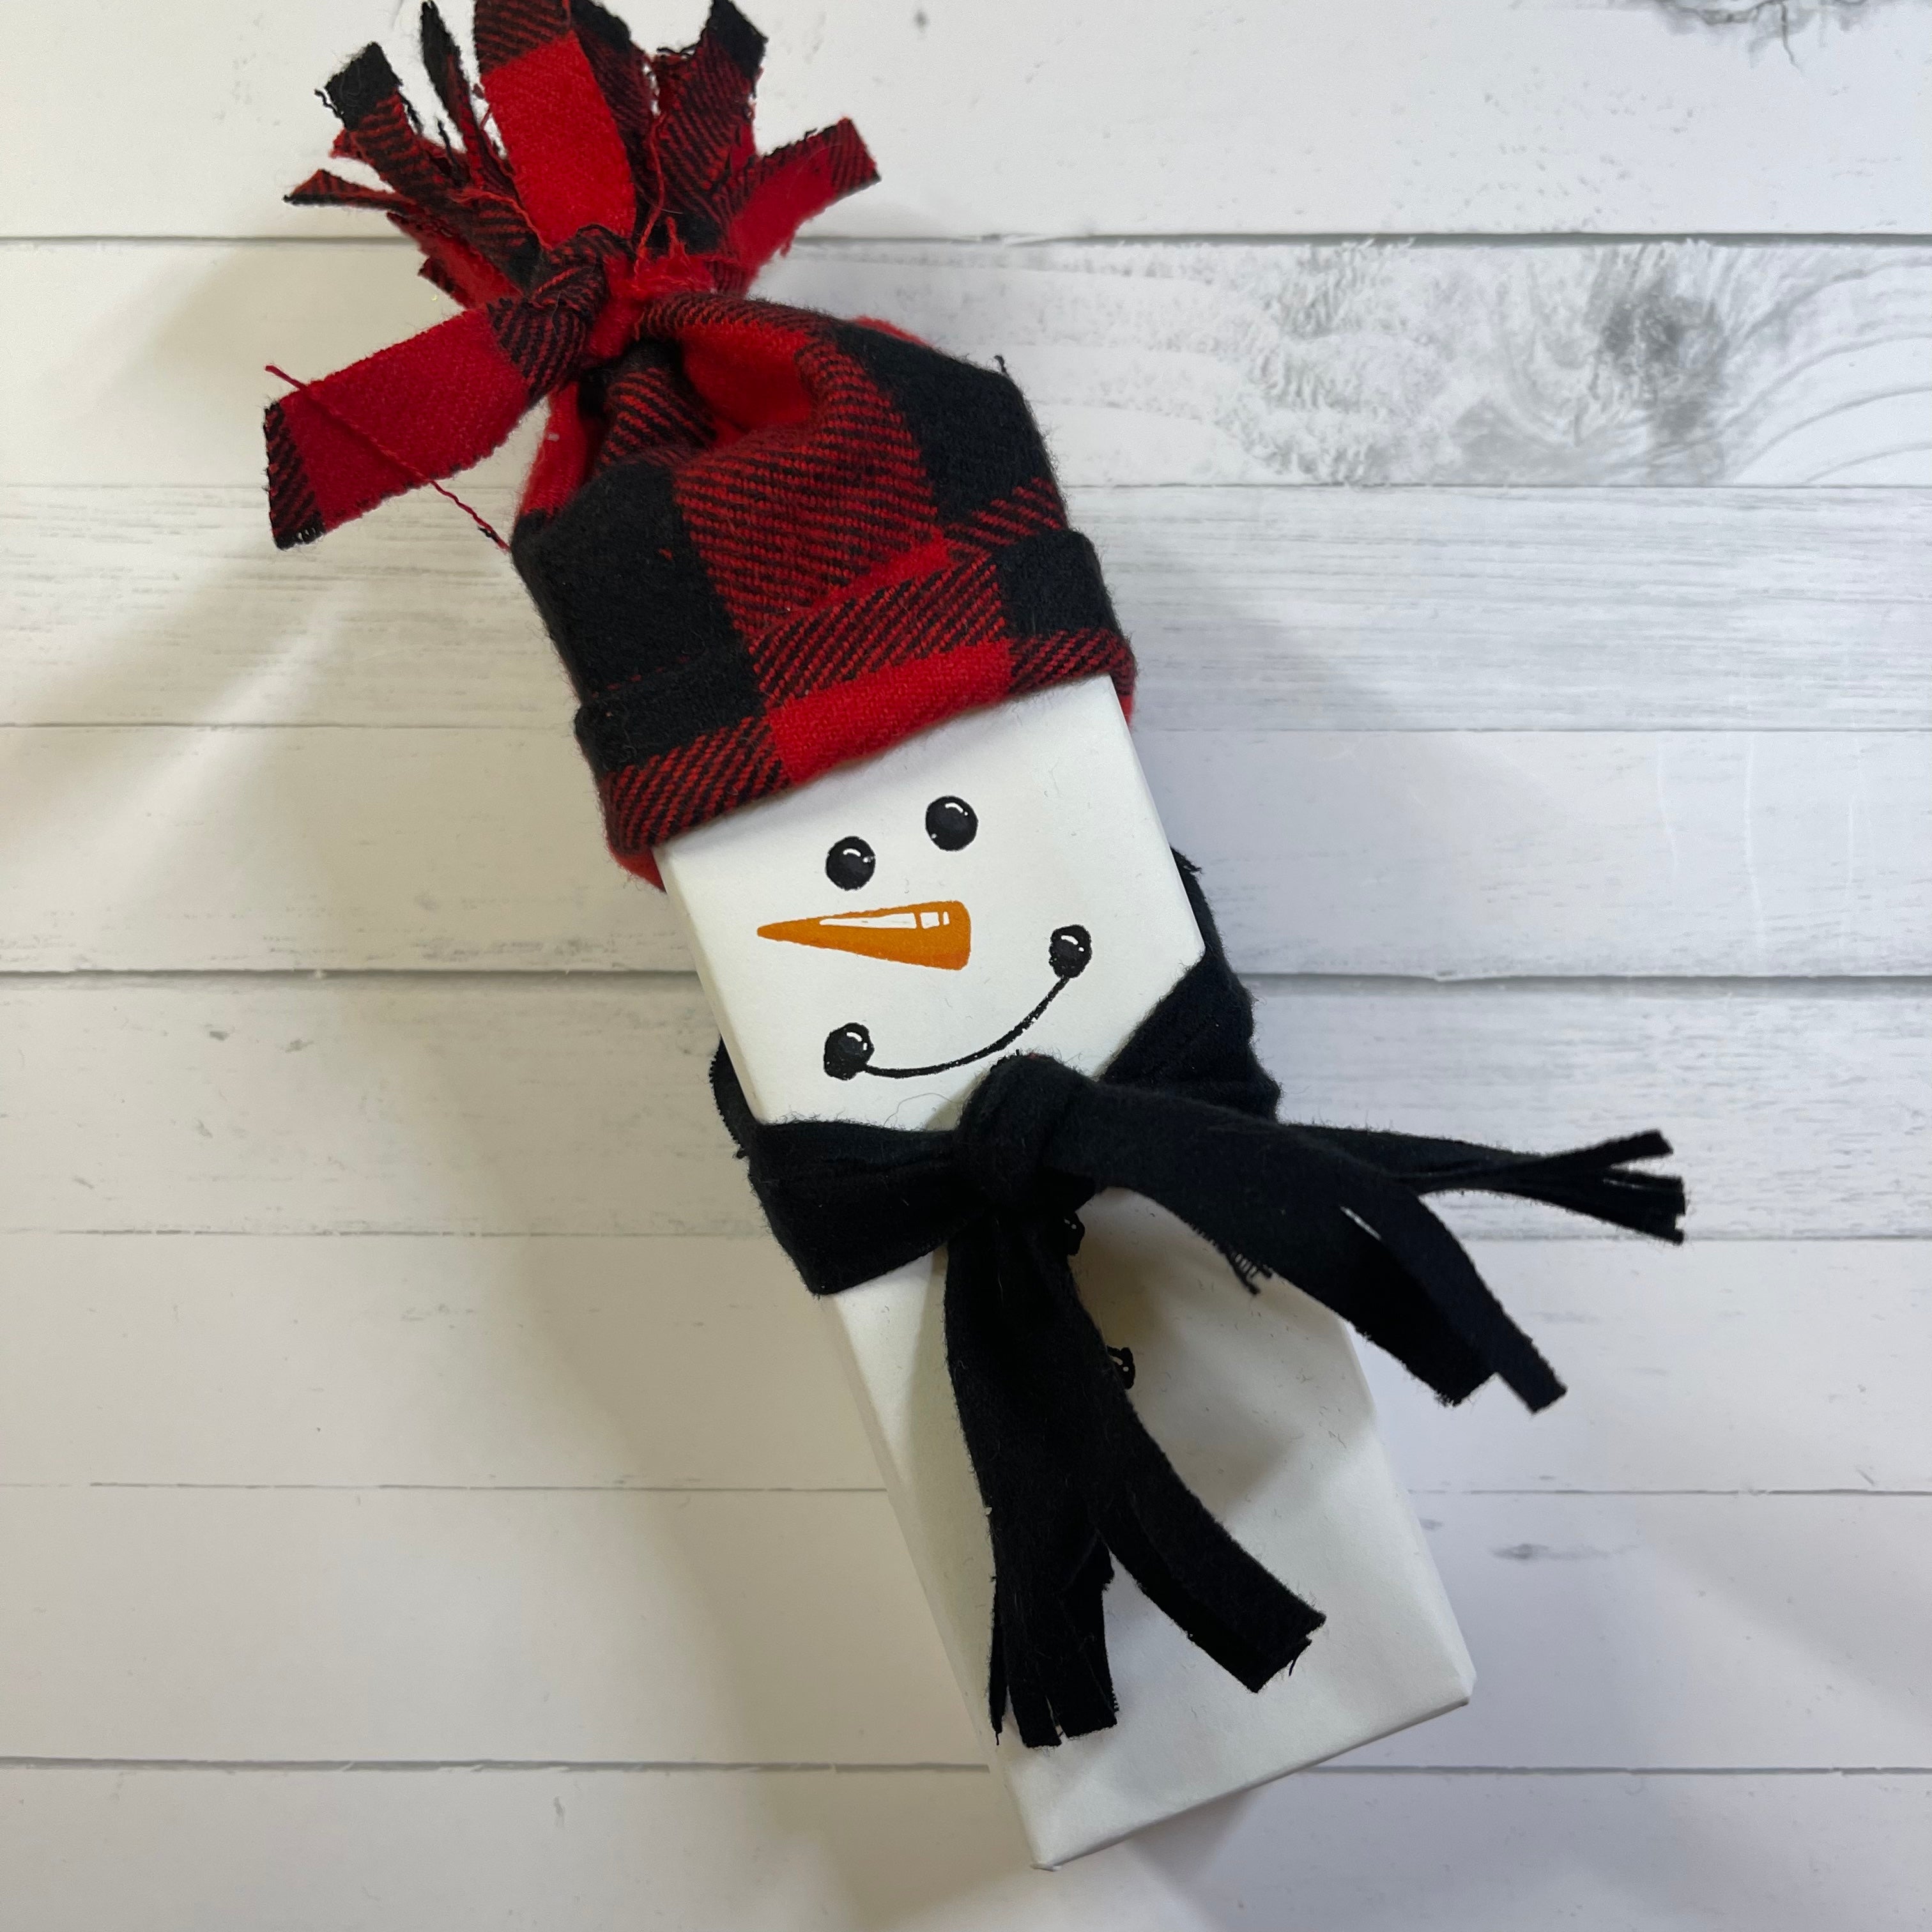 Snowman Kit - Red Solid